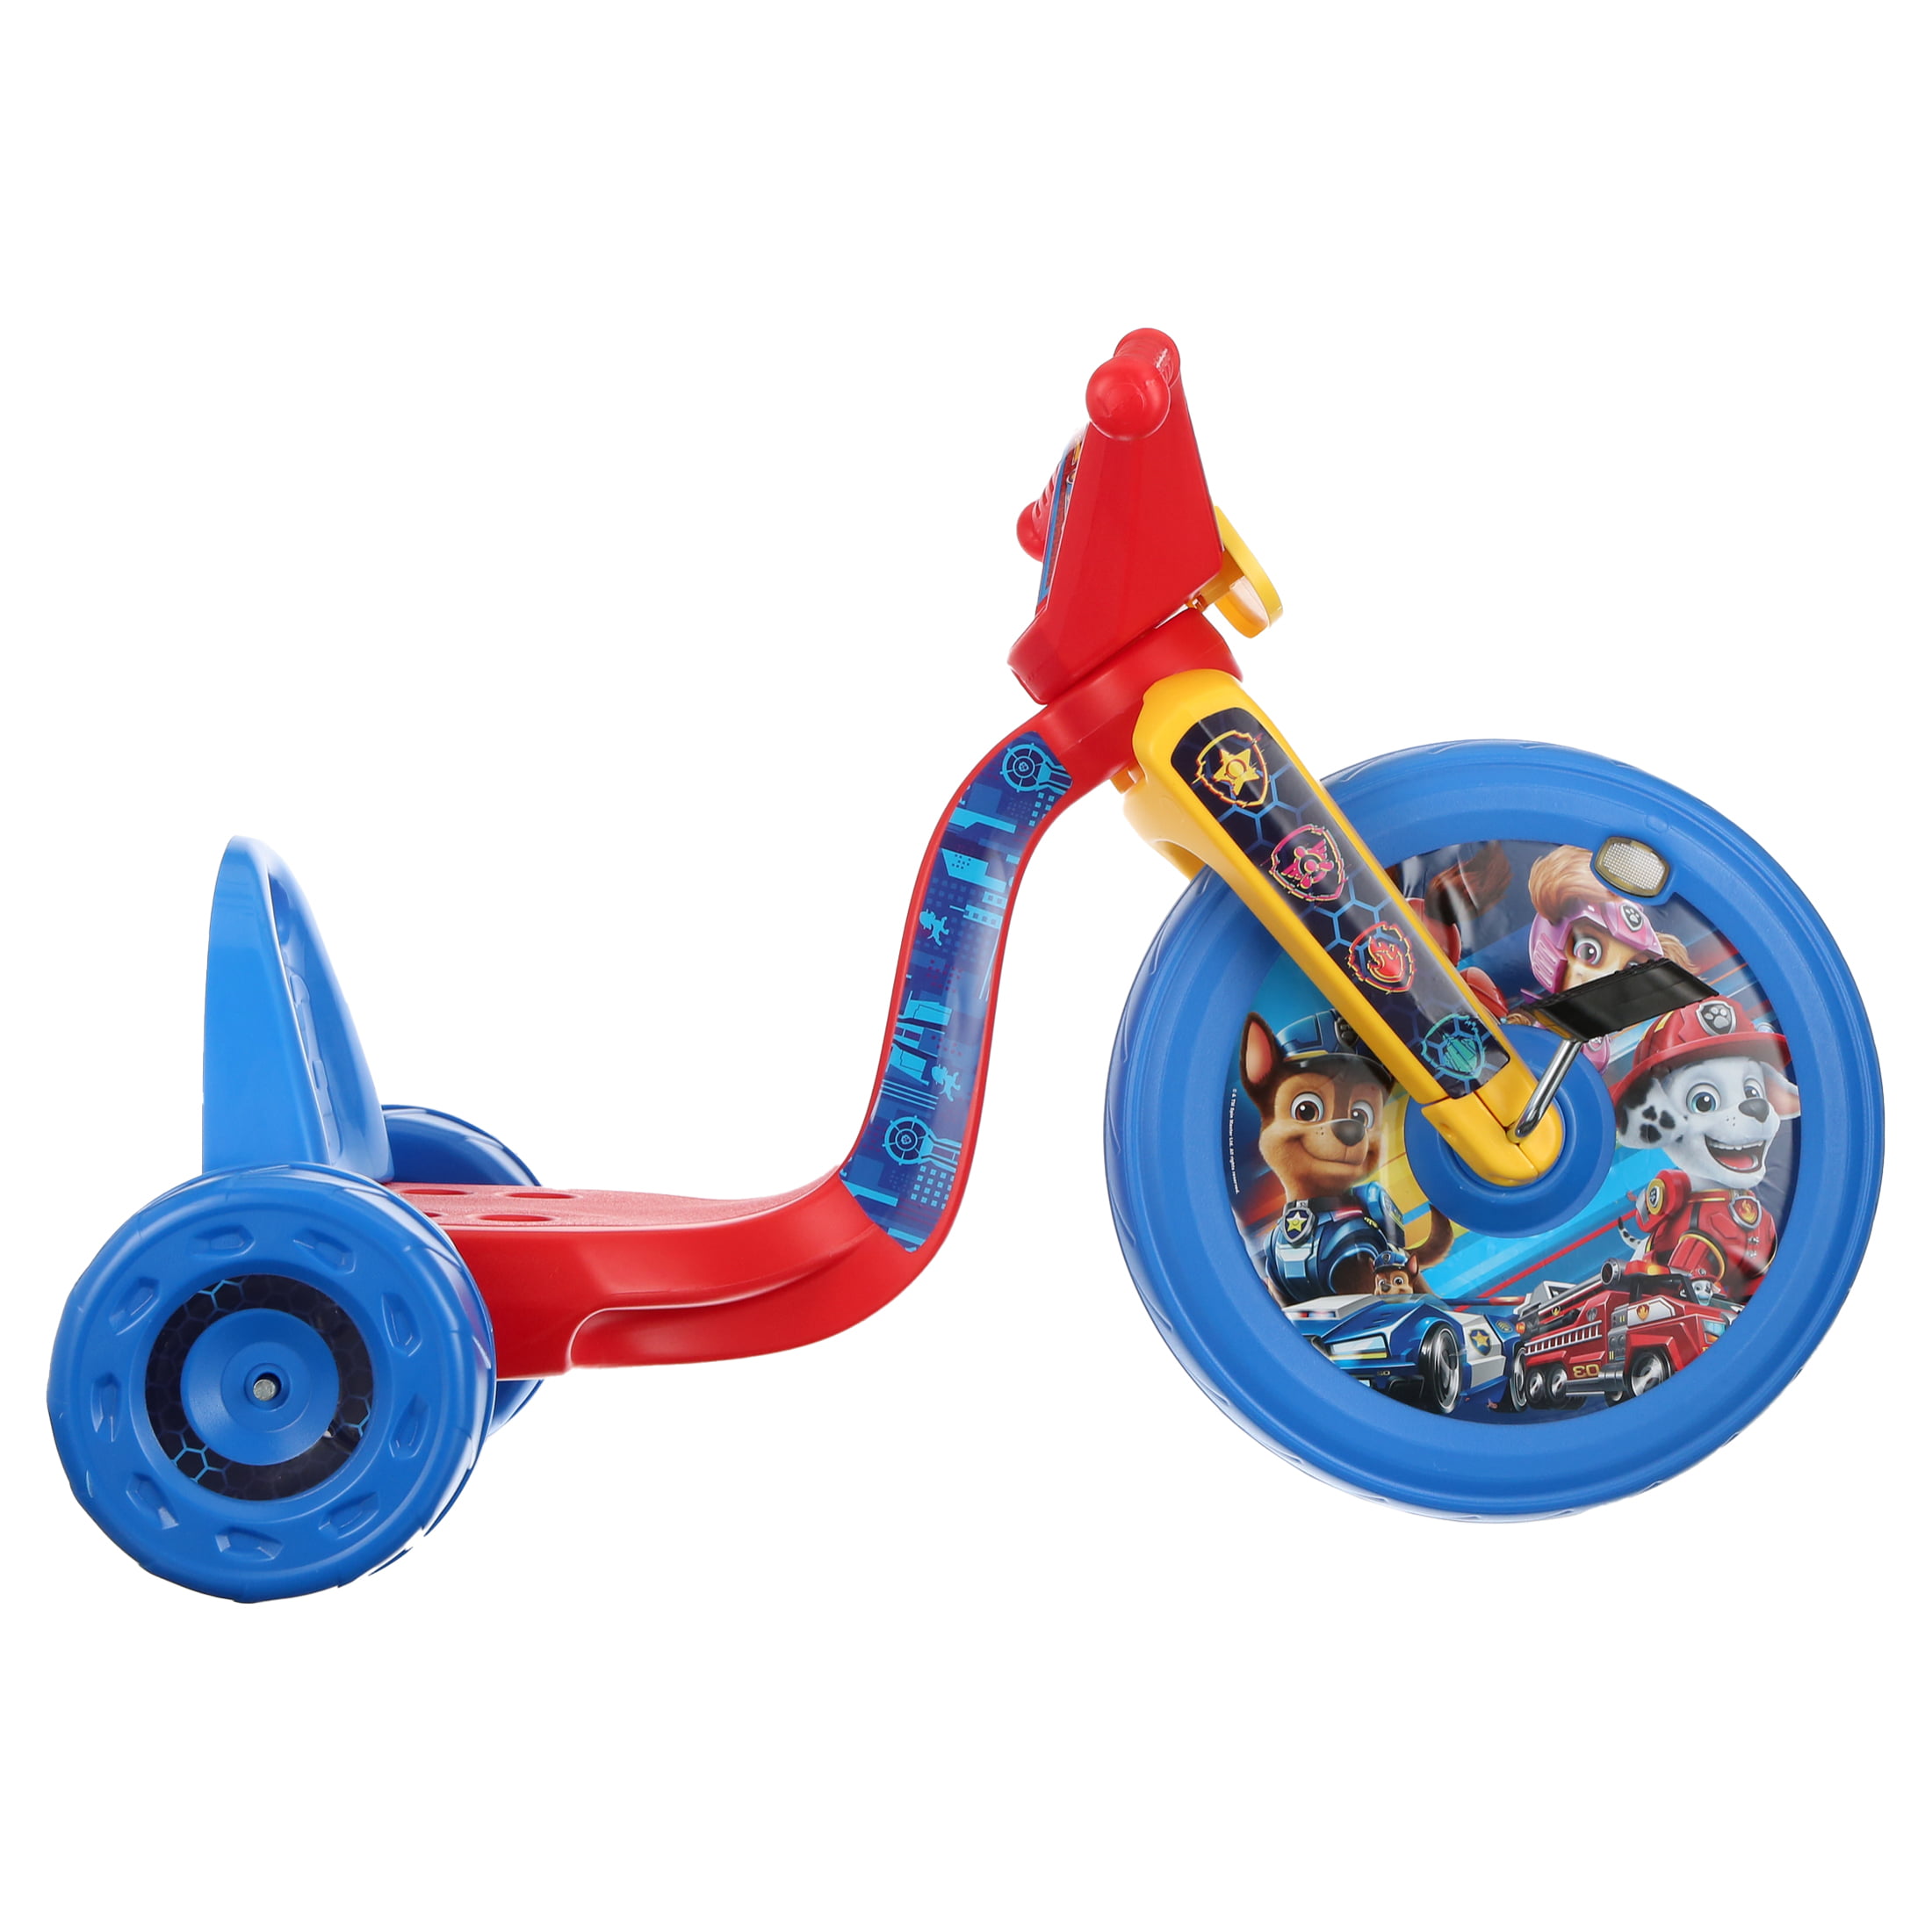 Blue/Green Paw Patrol Code Fly Wheel Tricycle Ride on 12.2 x 19.8 x 10 